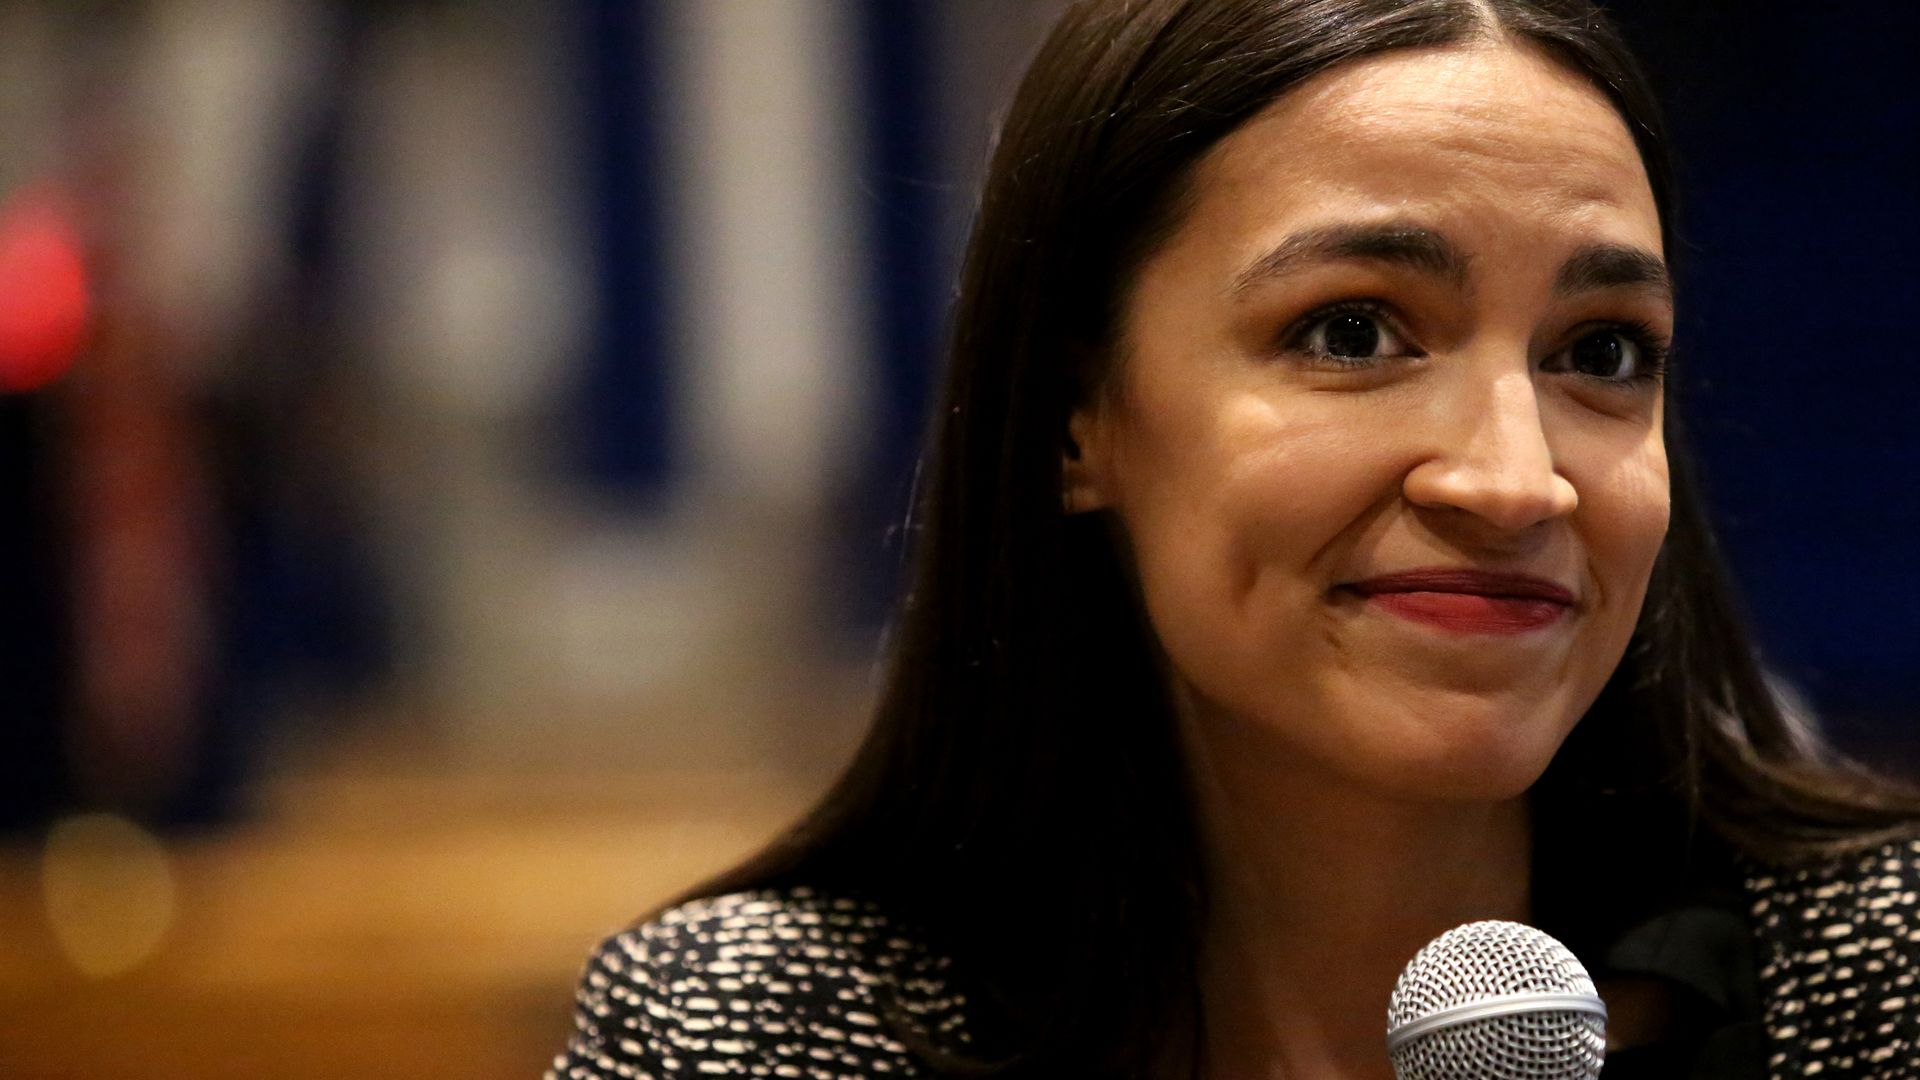 Alexandria Ocasio-Cortez (D-NY) speaks with members of the media before a Green New Deal For Public Housing Town Hall 